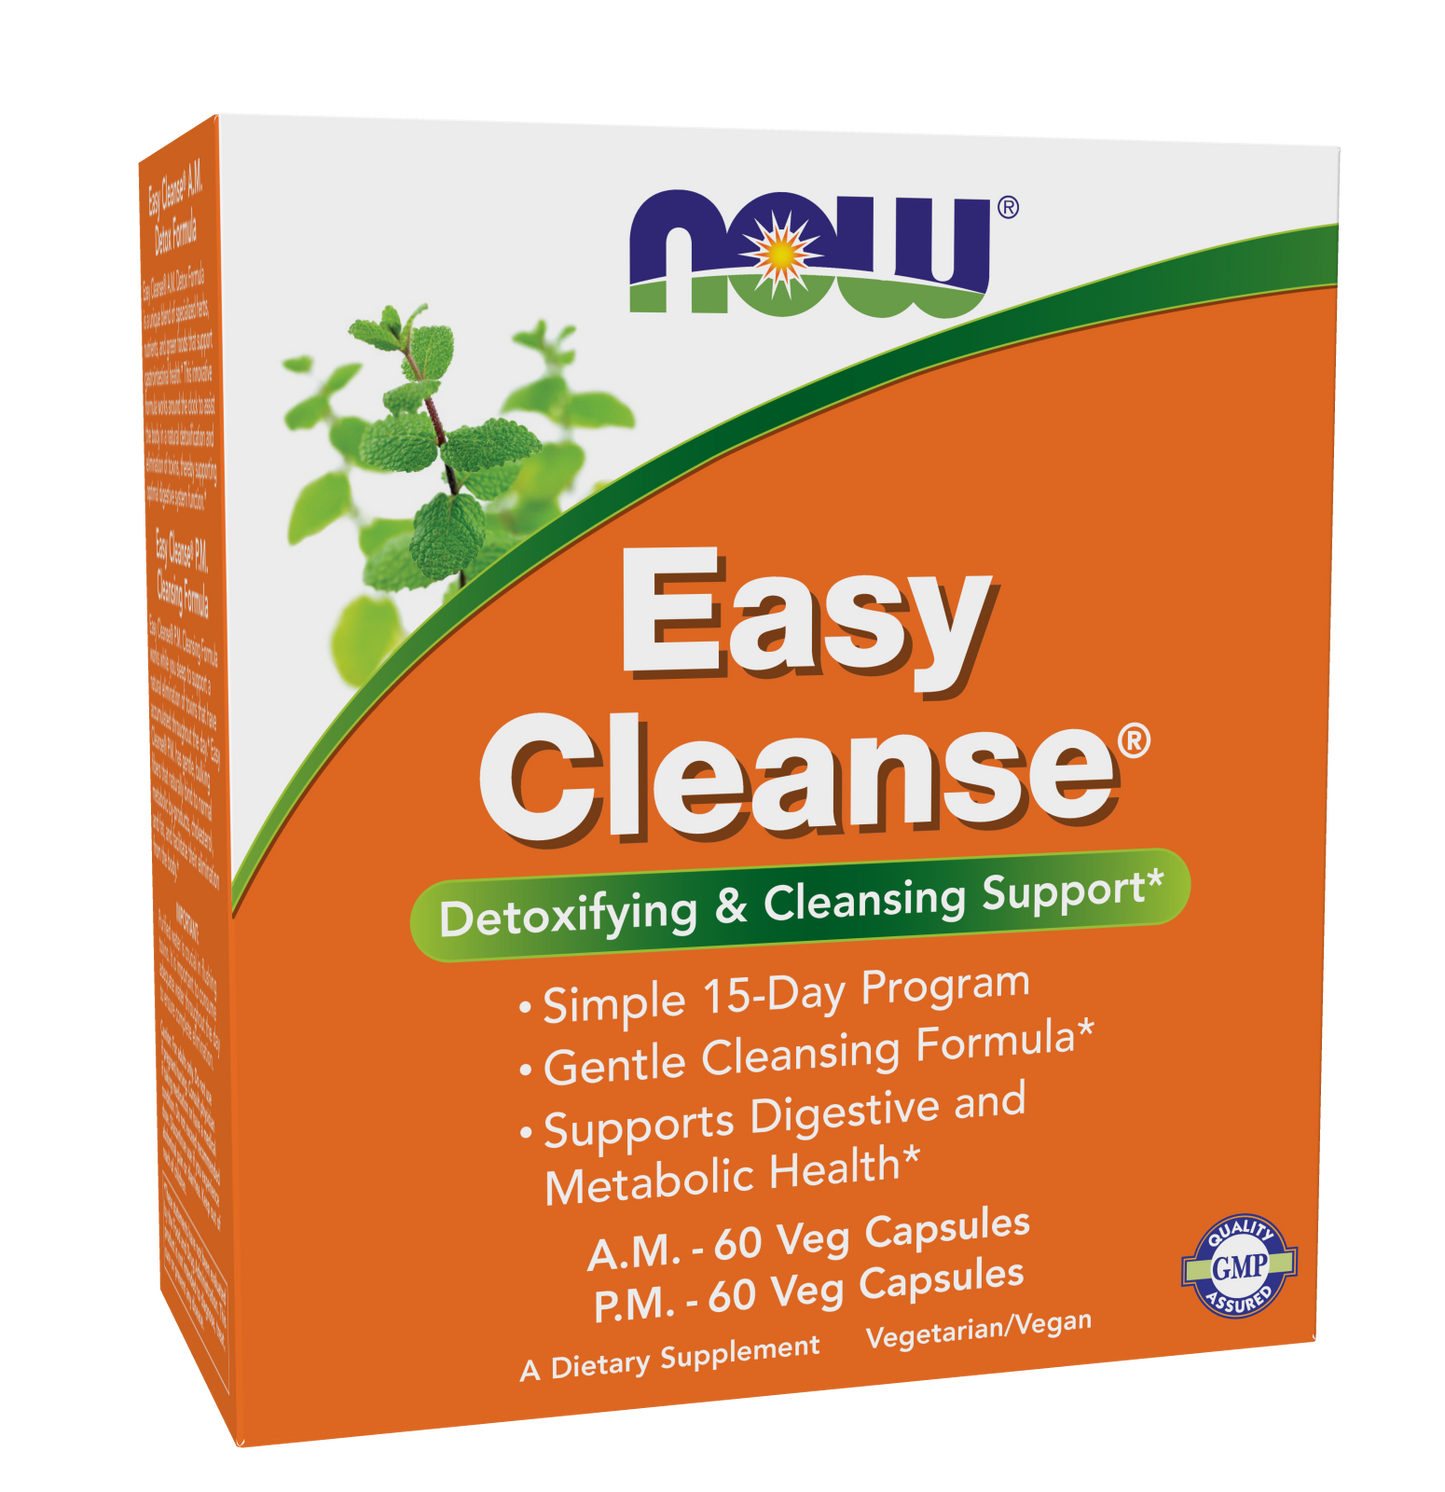 Easy Cleanse Detoxifying & Cleansing Support*